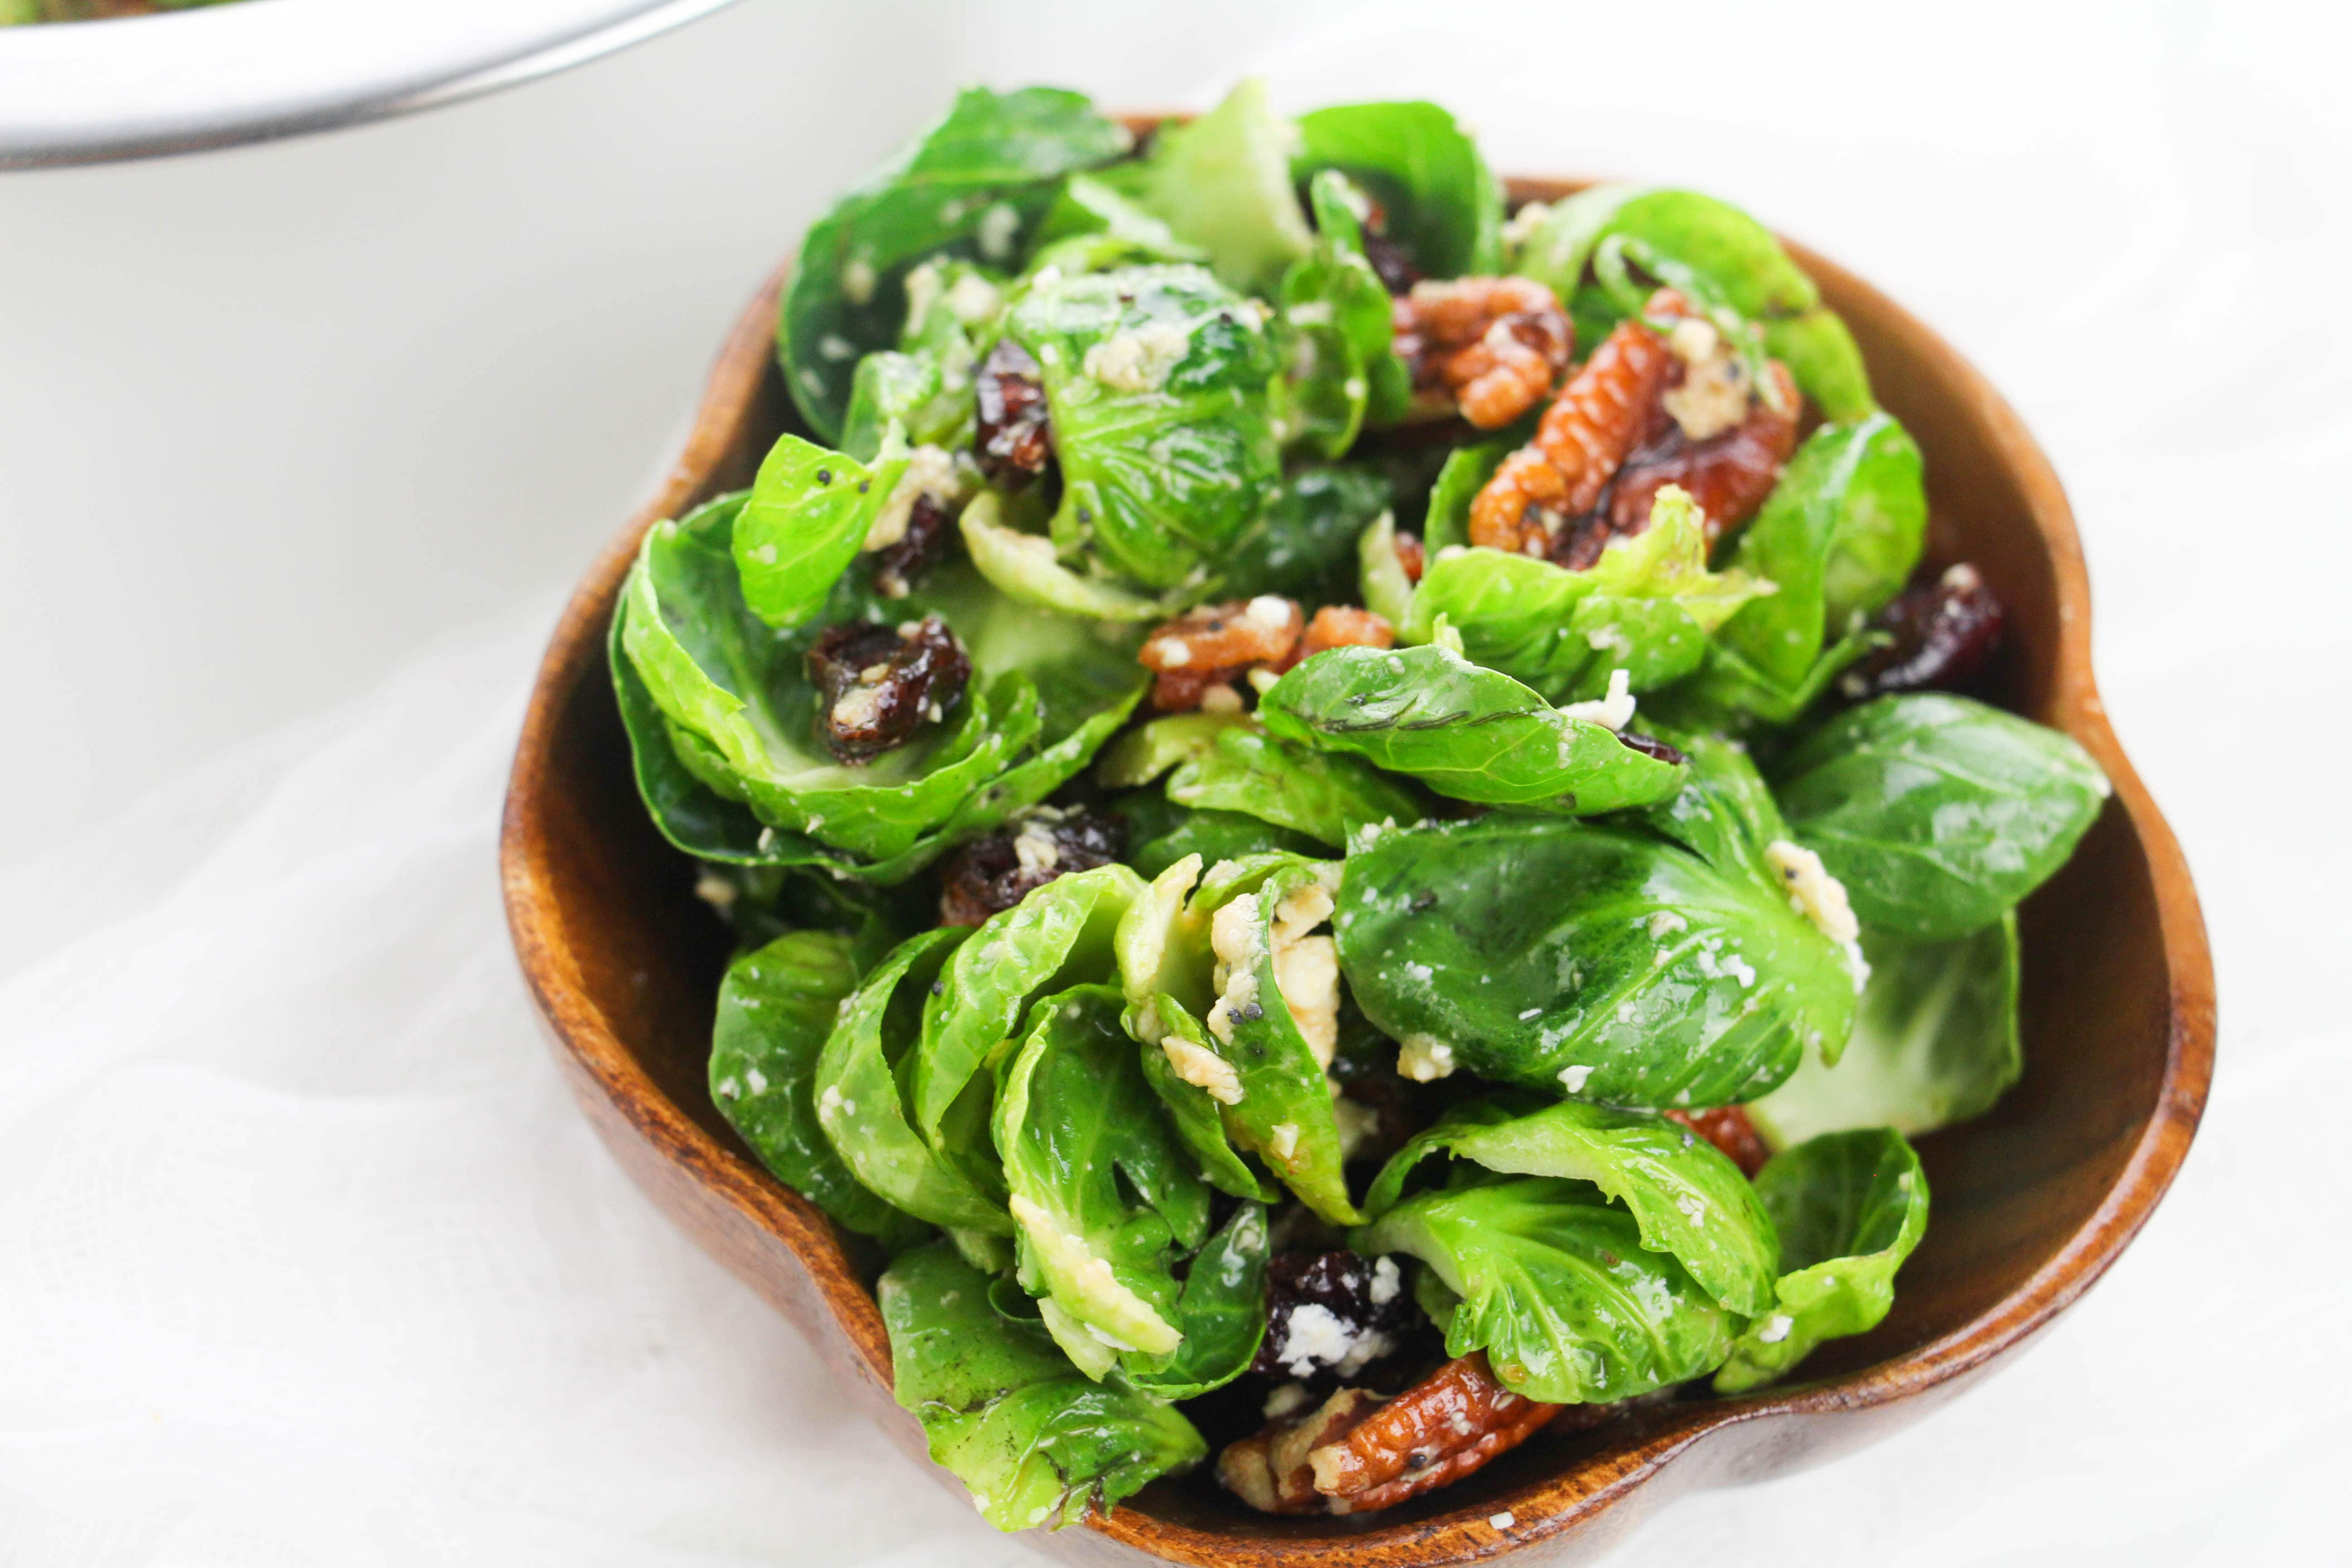 This incredibly easy brussels sprouts salad features pecans, bacon, cranberries and feta cheese! Impress your guests with this alternative to regular salad!